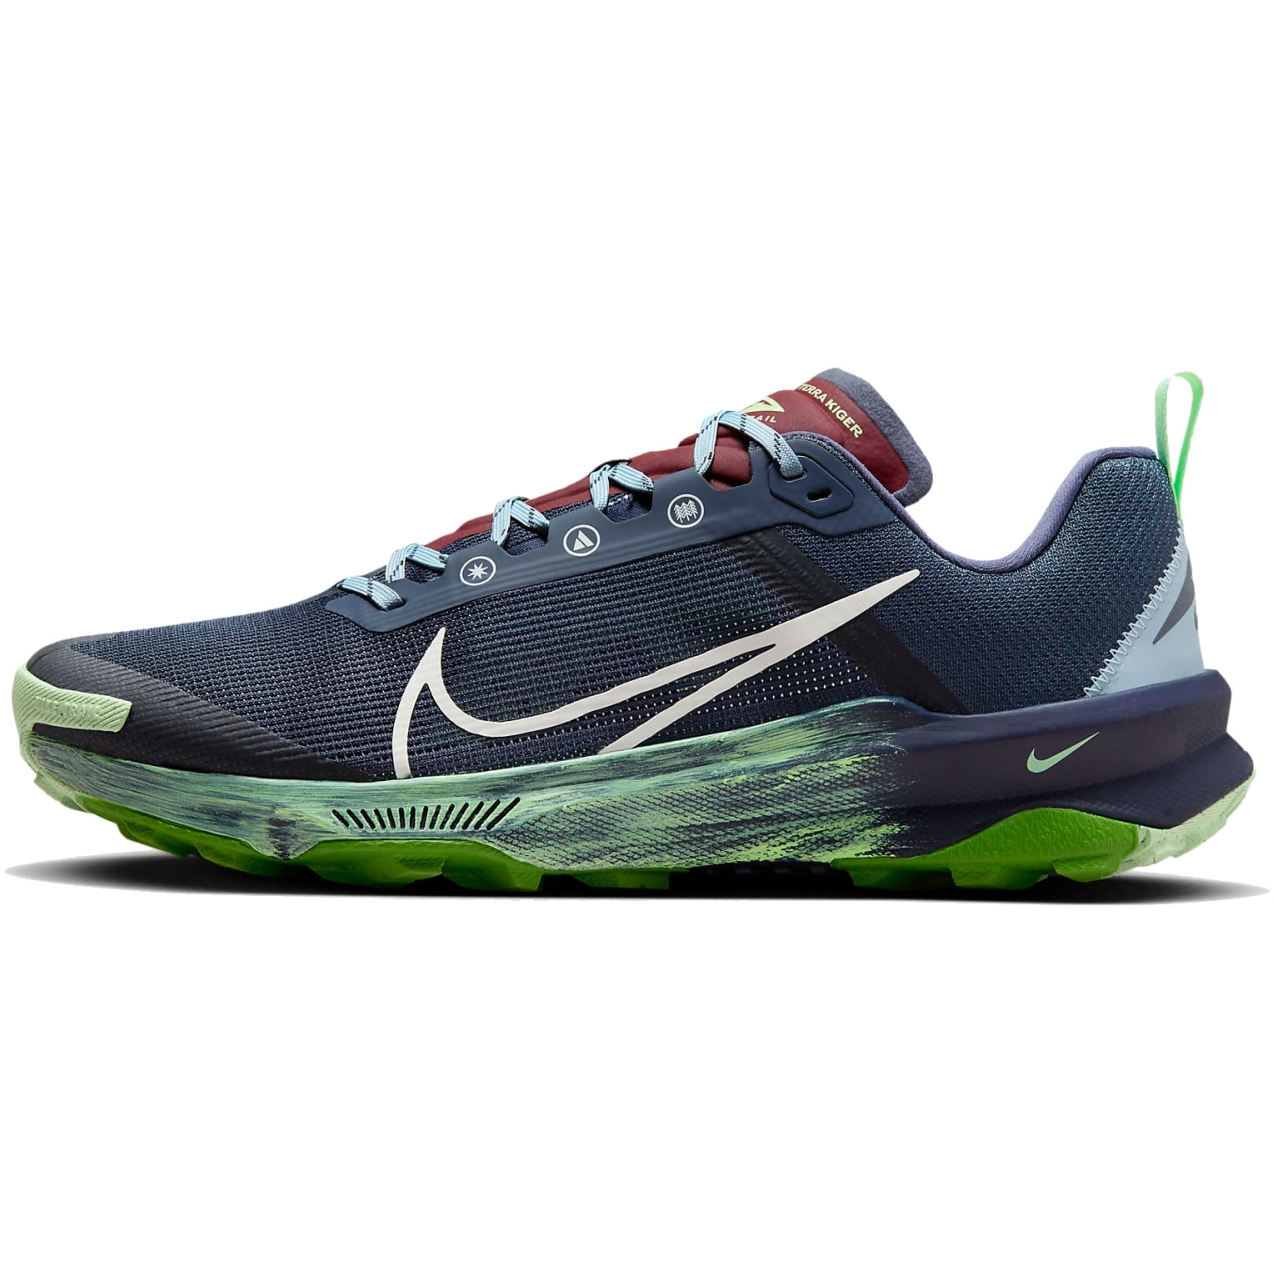 Picture of Nike Kiger 9 Trail Running Shoes Men - thunder blue/vapor green/light armory blue/summit white DR2693-403